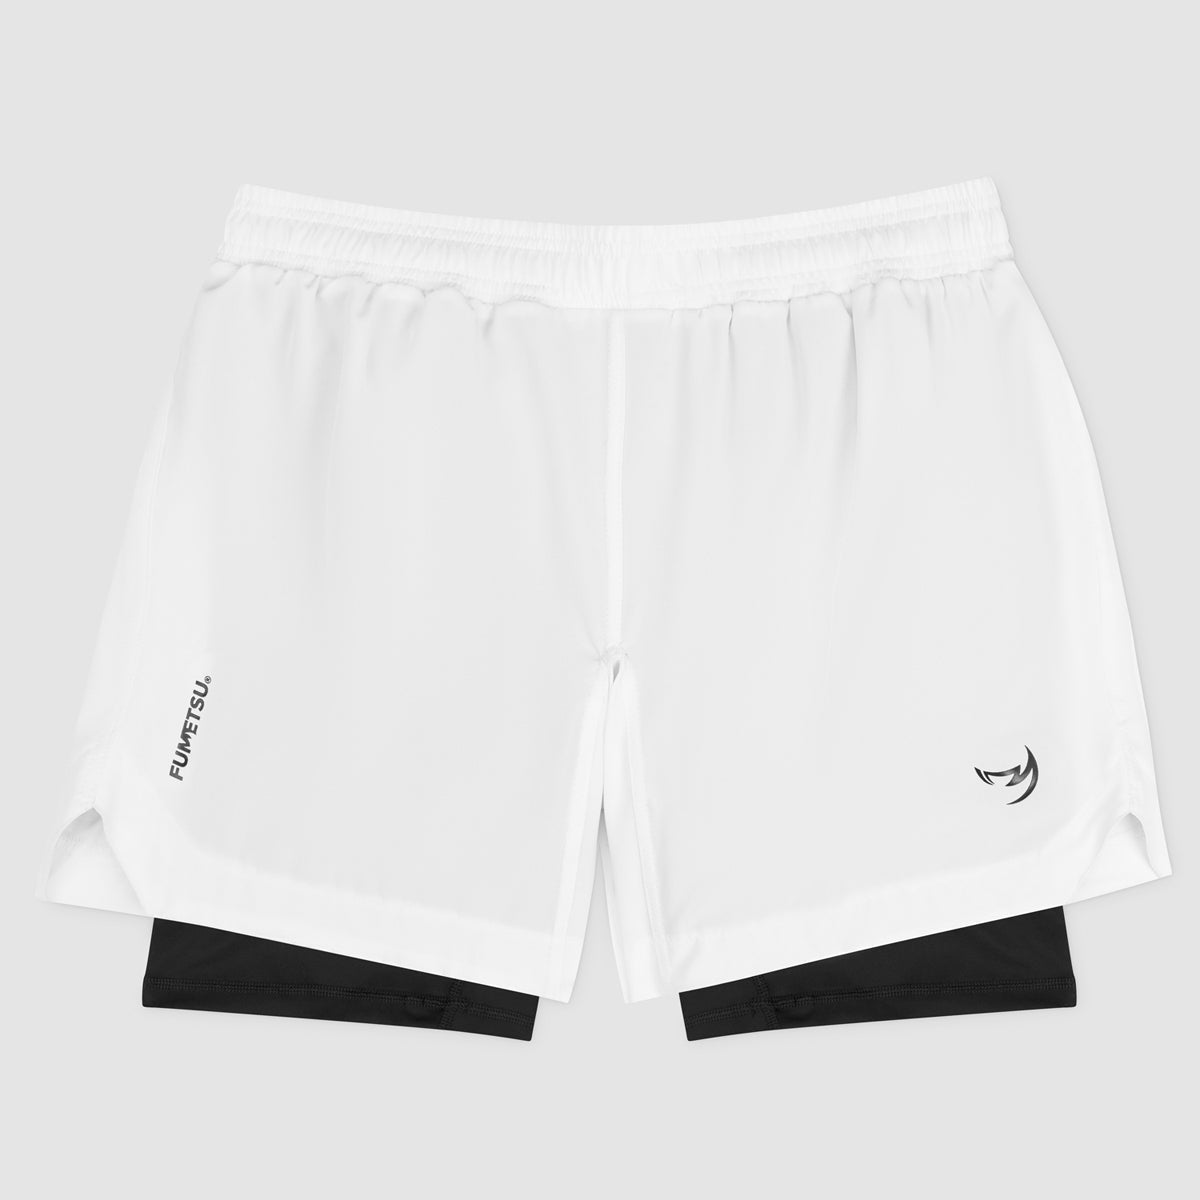 MMA Fight Shorts from Bytomic